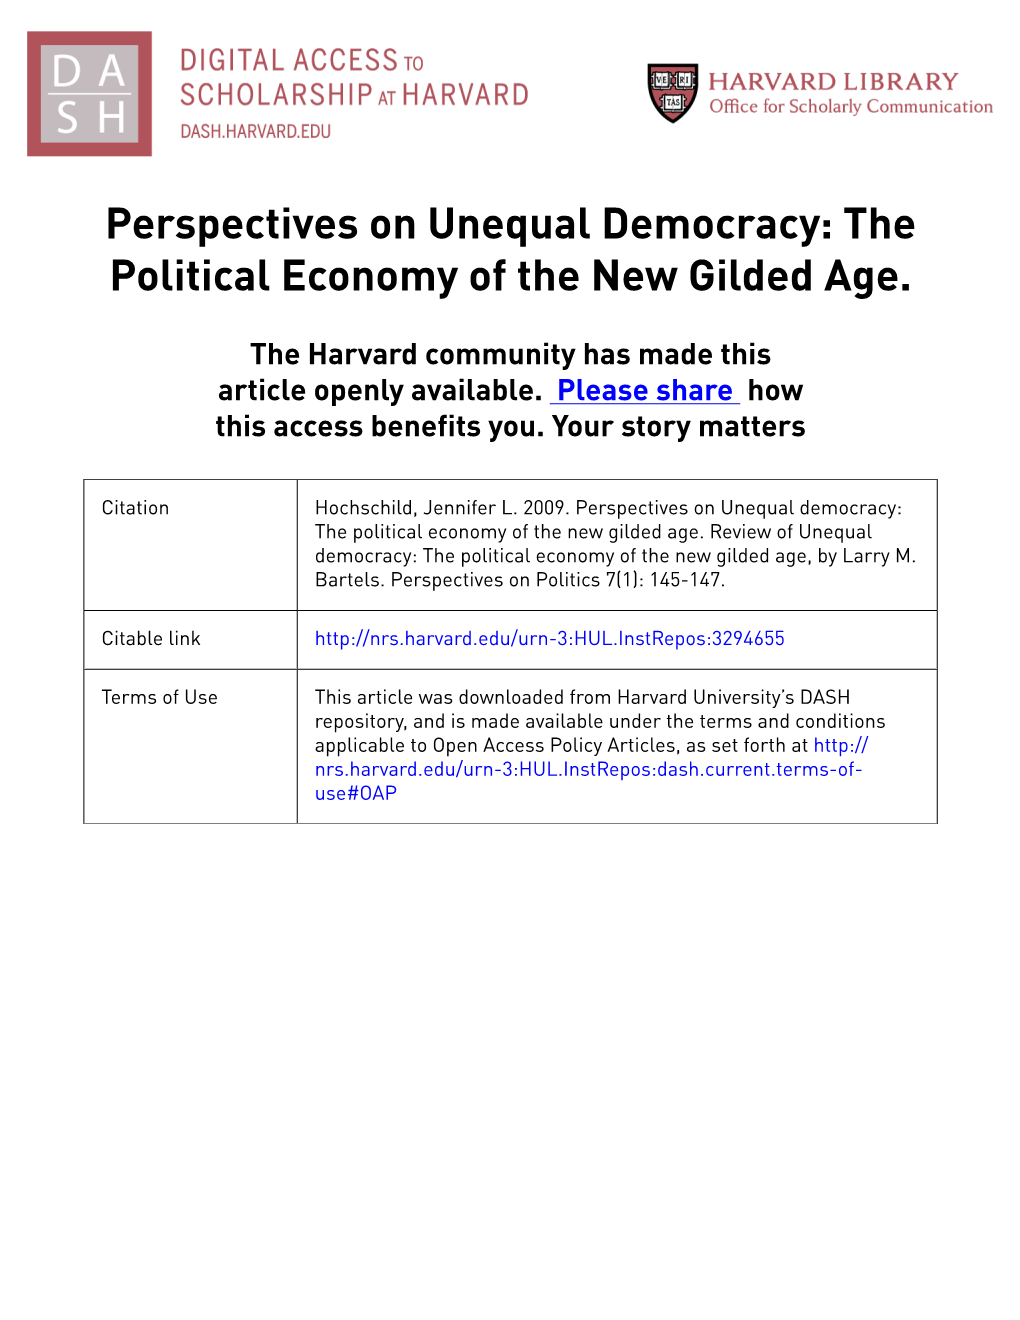 Perspectives on Unequal Democracy: the Political Economy of the New Gilded Age